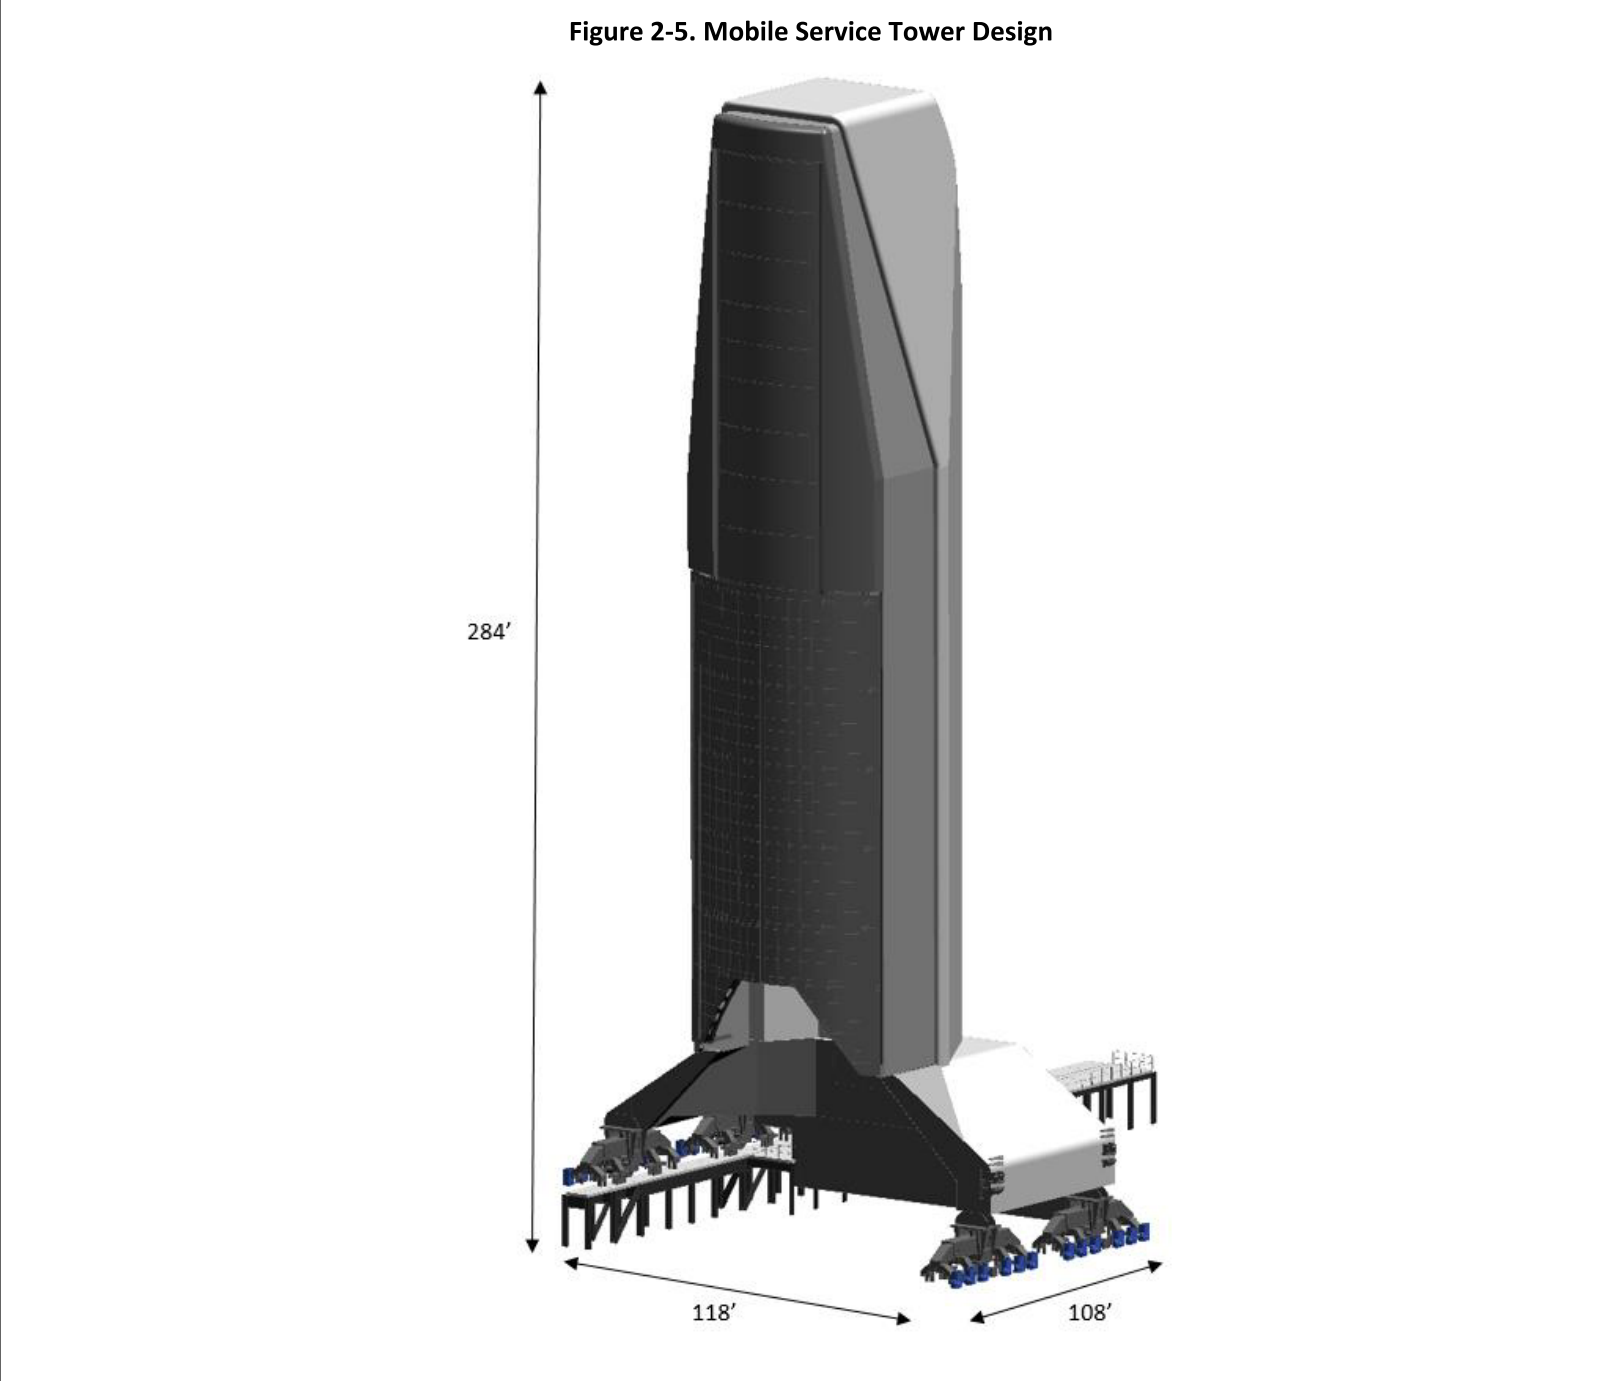 Pad 39A F9 FH mobile service tower renders (SpaceX) 1